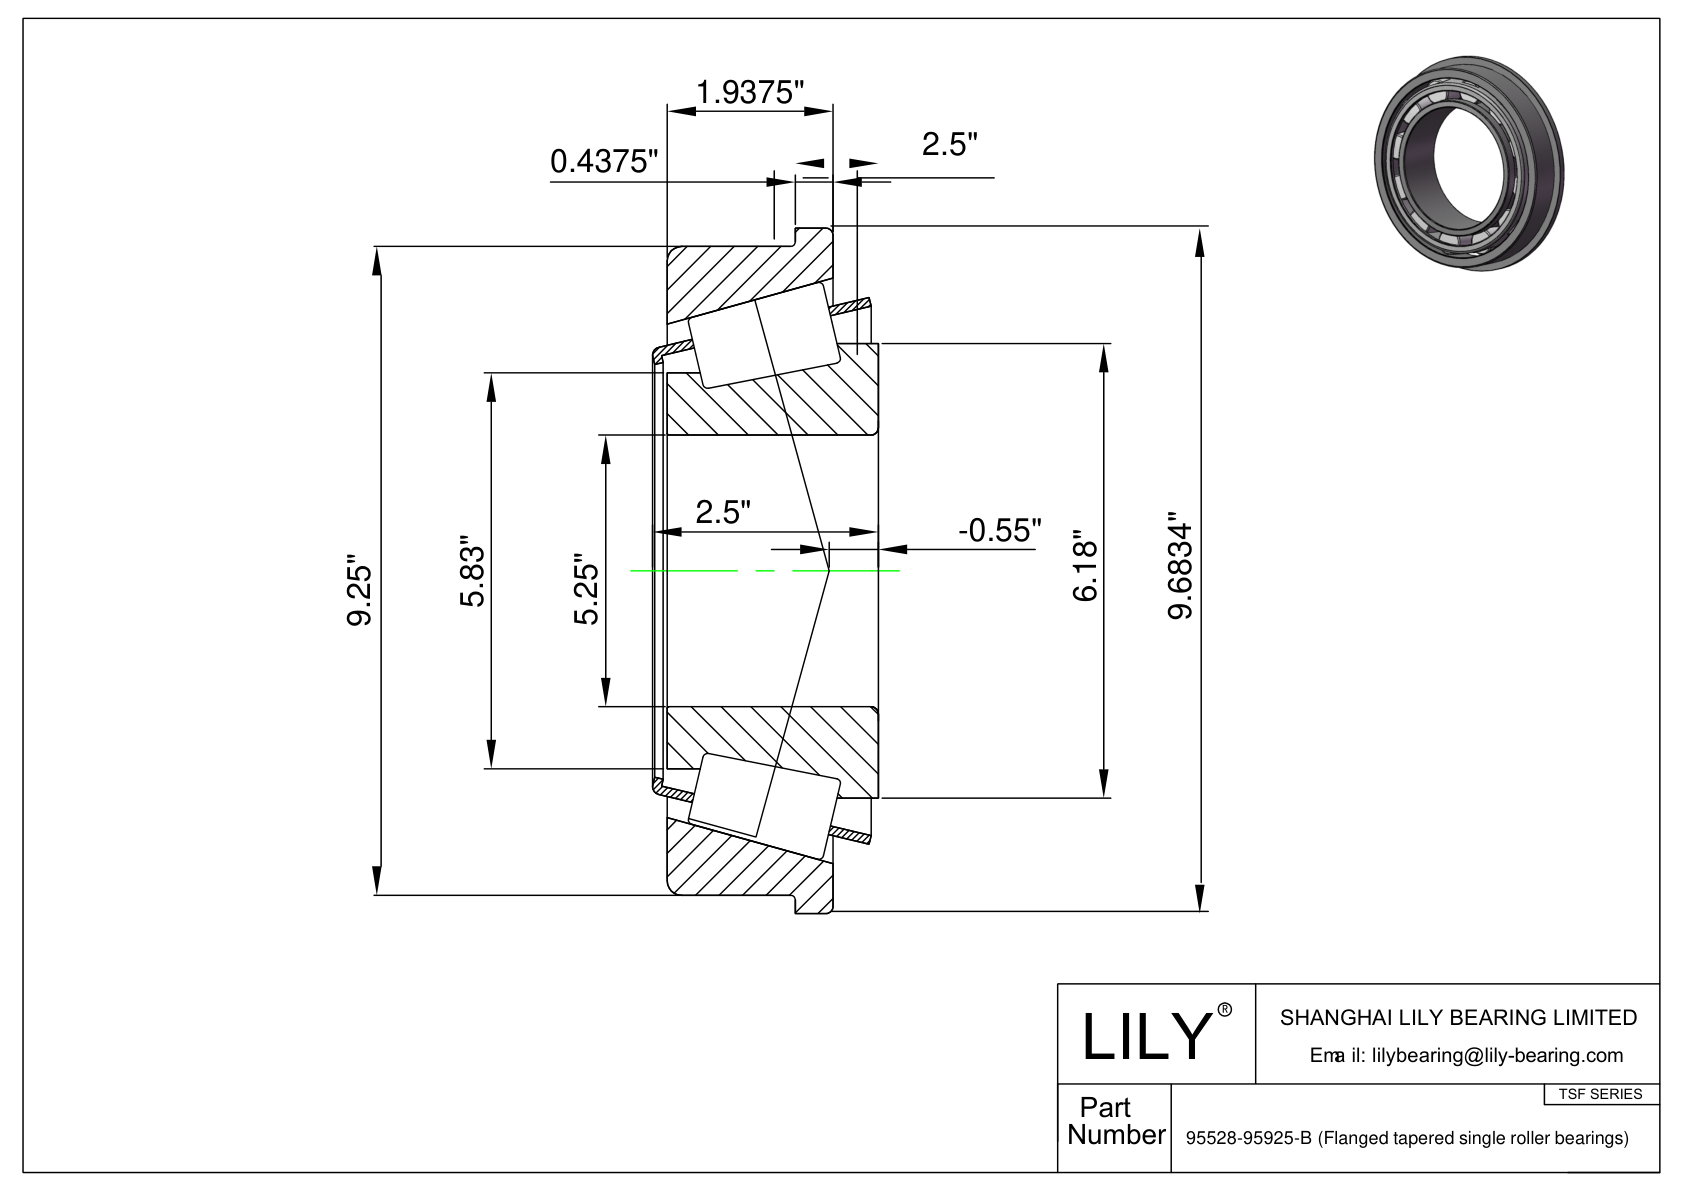 95528-95925-B TSF (Tapered Single Roller Bearings with Flange) (Imperial) cad drawing